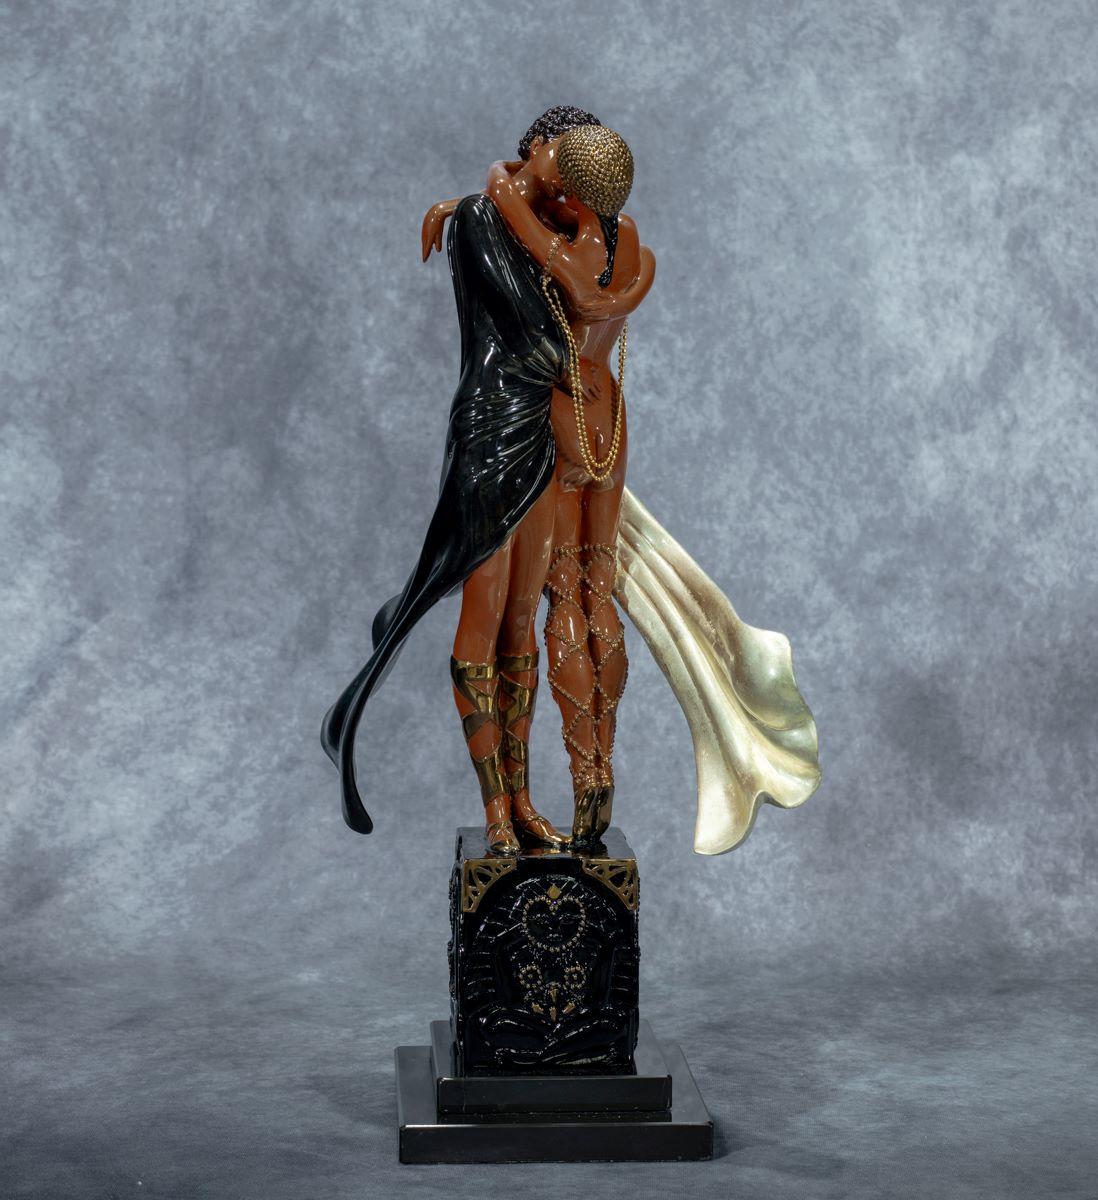 Lovers and Idol was featured on the cover of Harper’s Bazar in August, 1917, a very early work in Erte’s collaboration with the magazine. In his sculptural interpretation of that image, only the term ‘cinematics in bronze’ can describe this